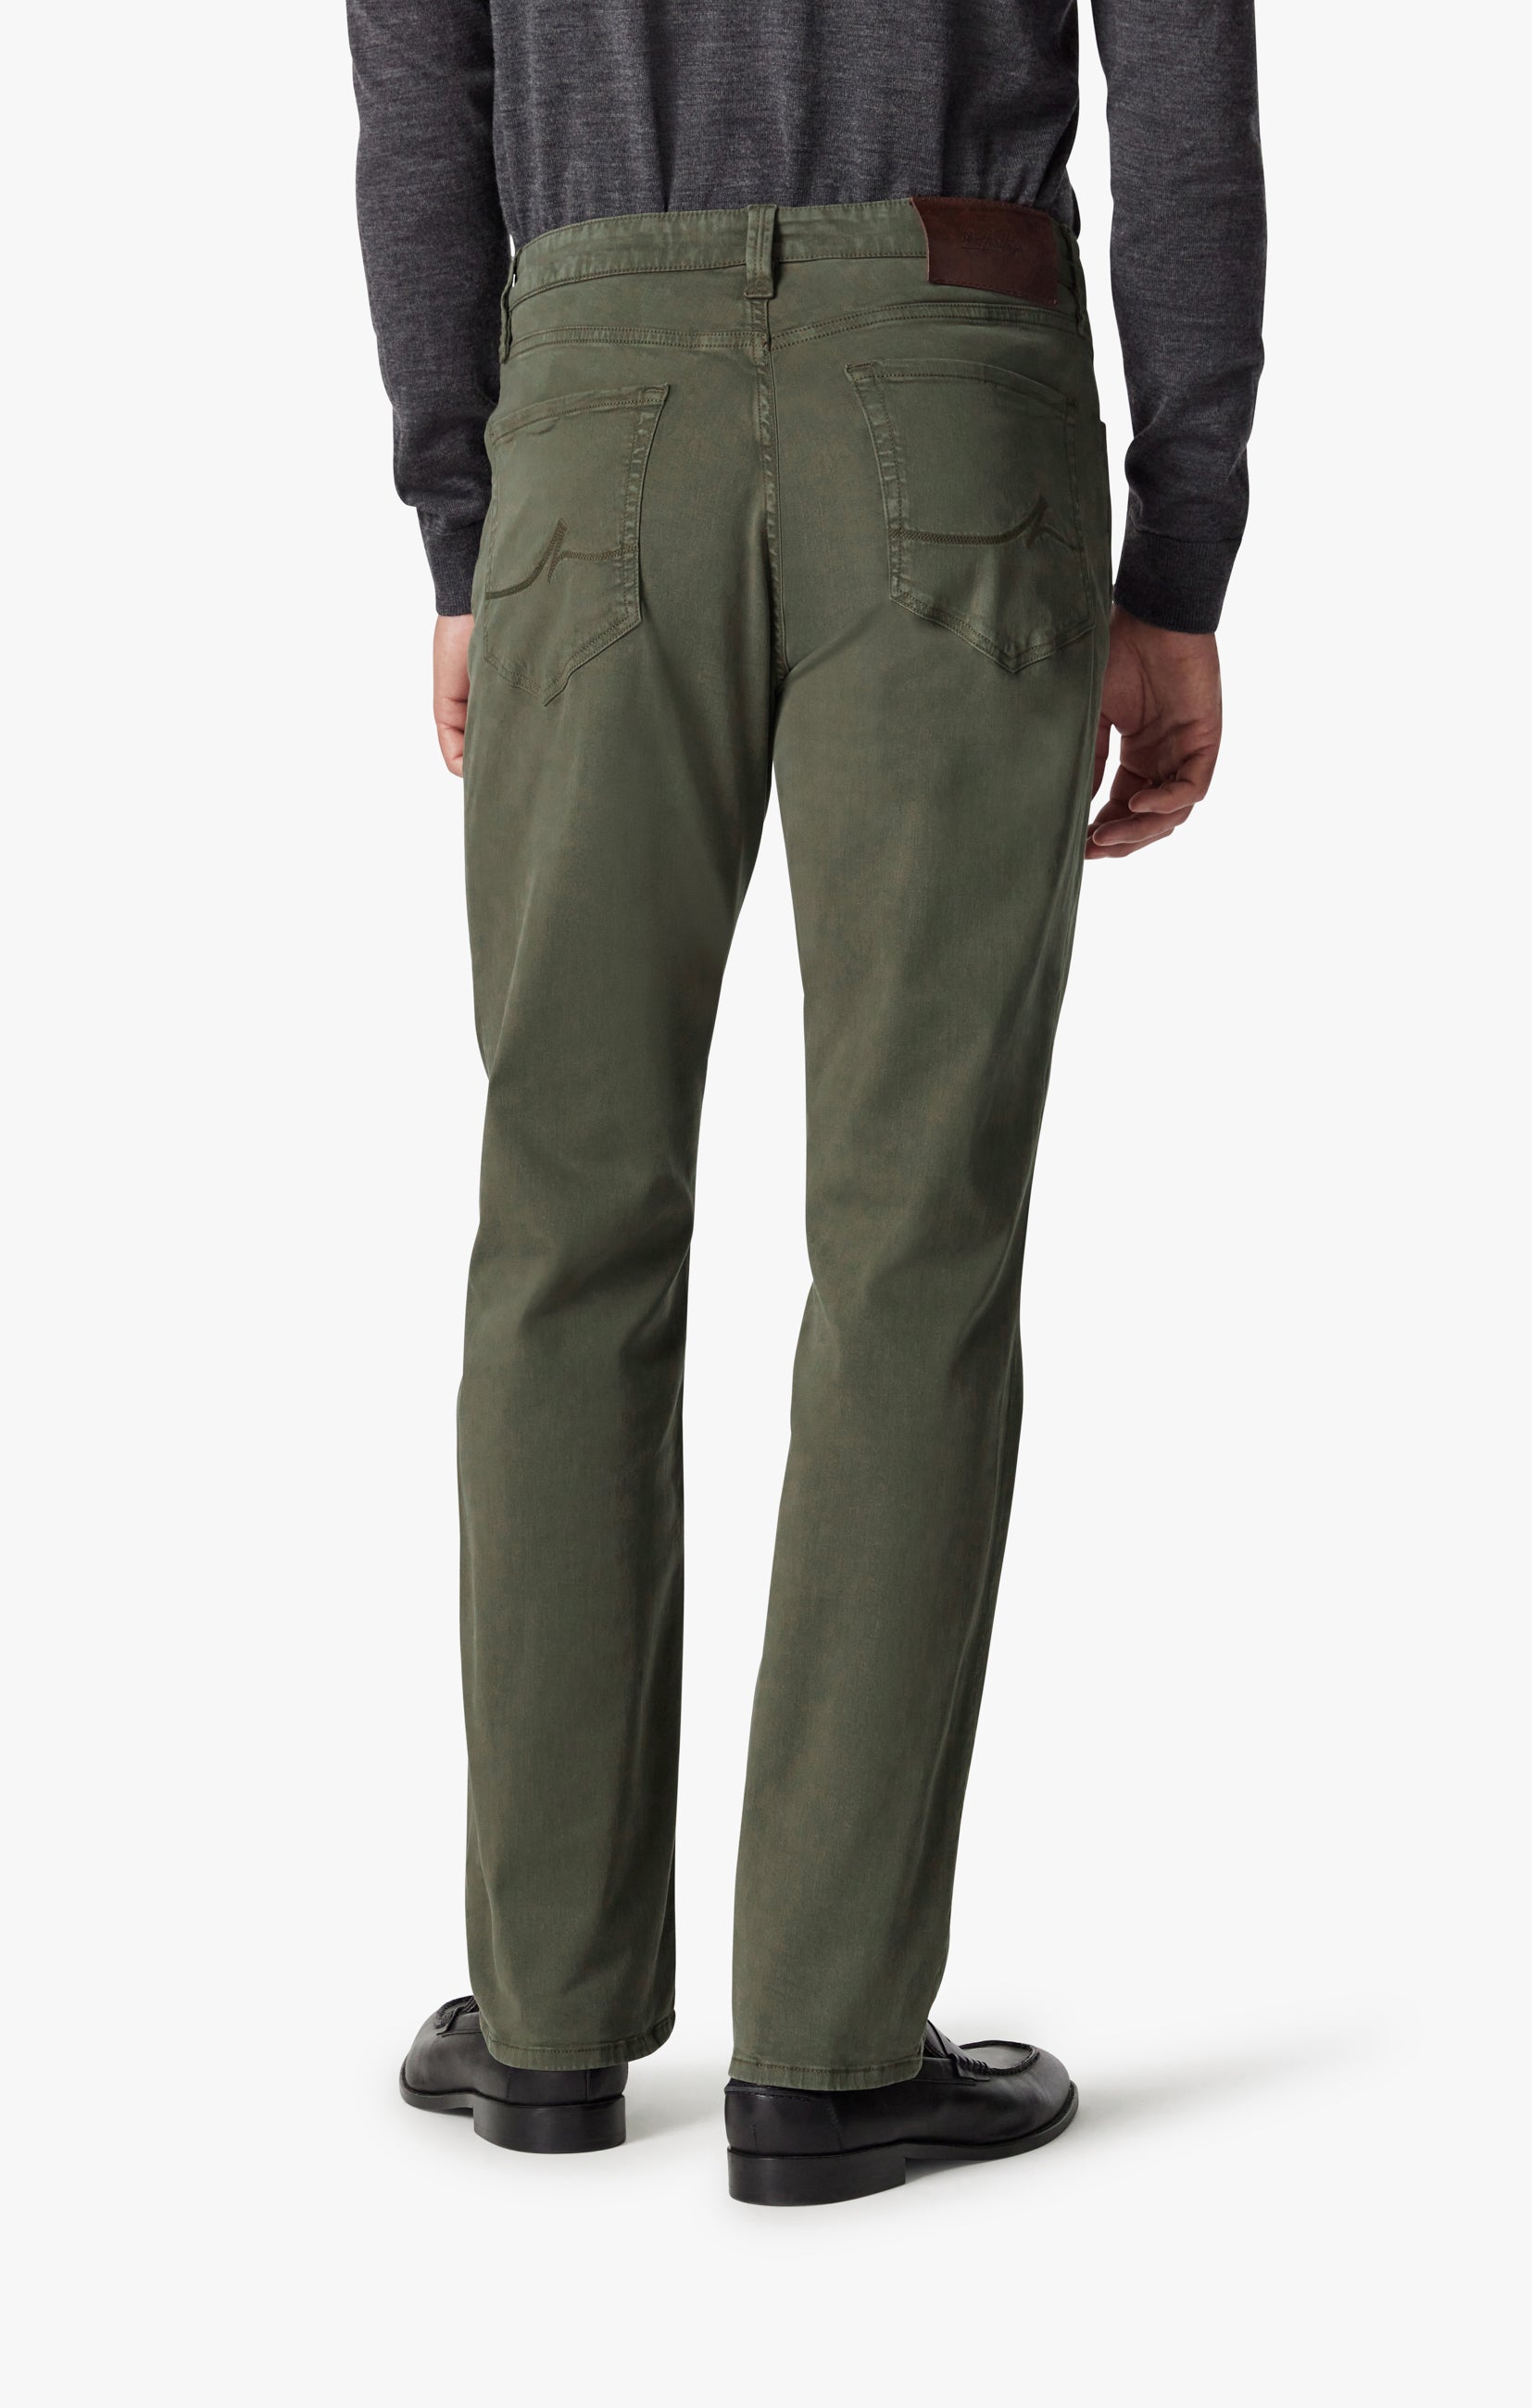 Charisma Relaxed Straight Leg Pants In Olive Twill Image 6